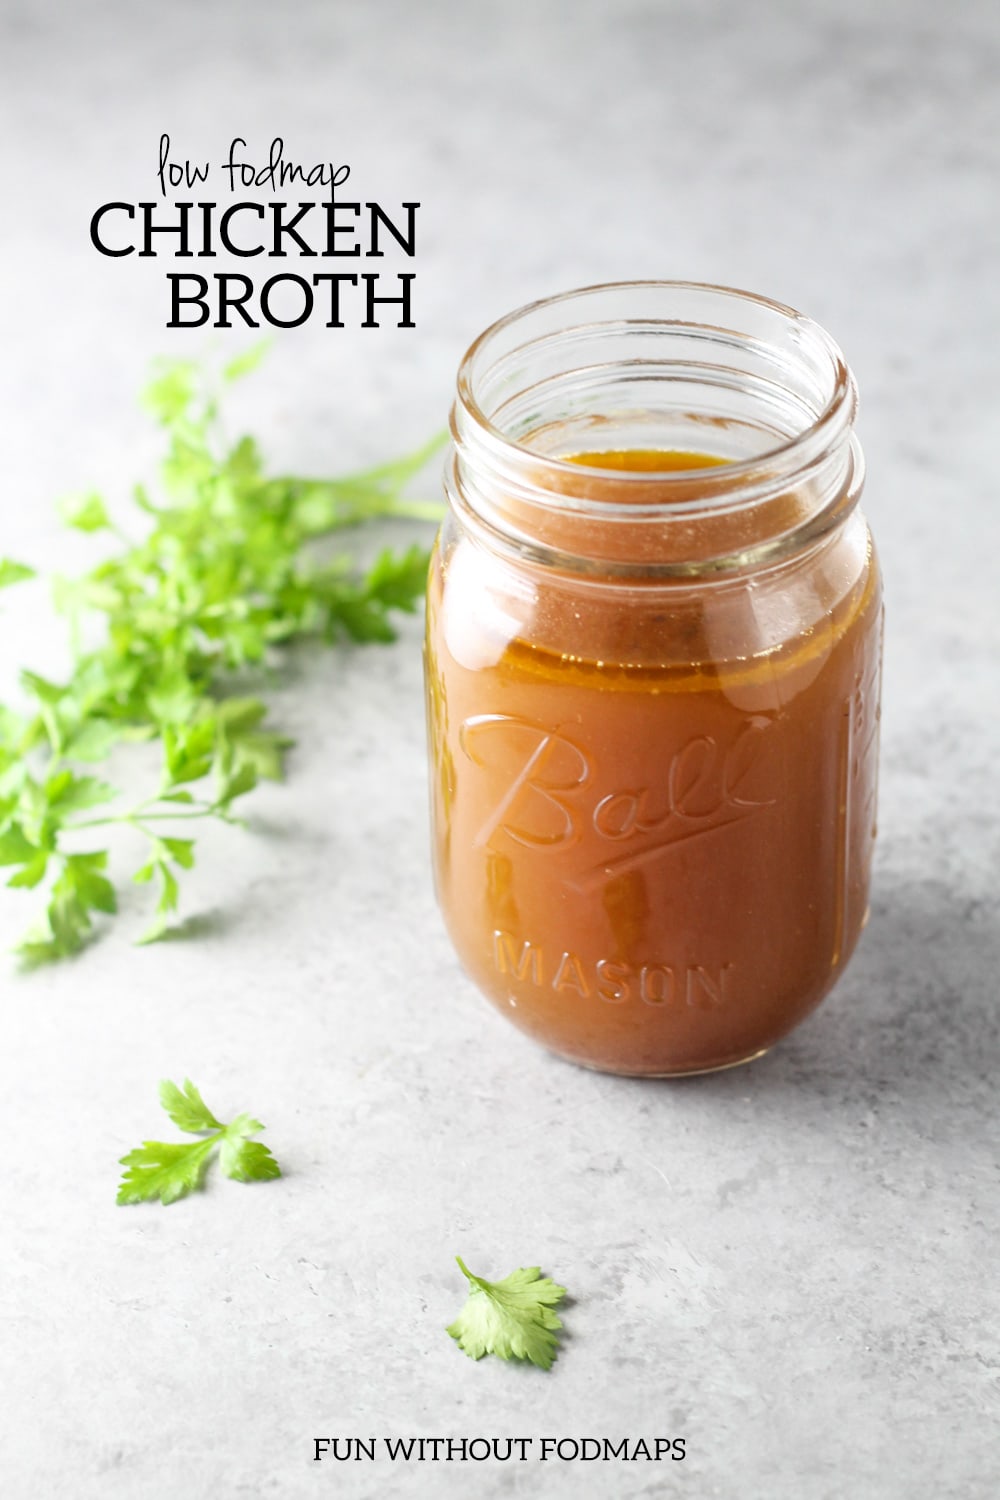 A mason jar filled with chicken broth. Next to it, black text reads "Low FODMAP Chicken Broth."